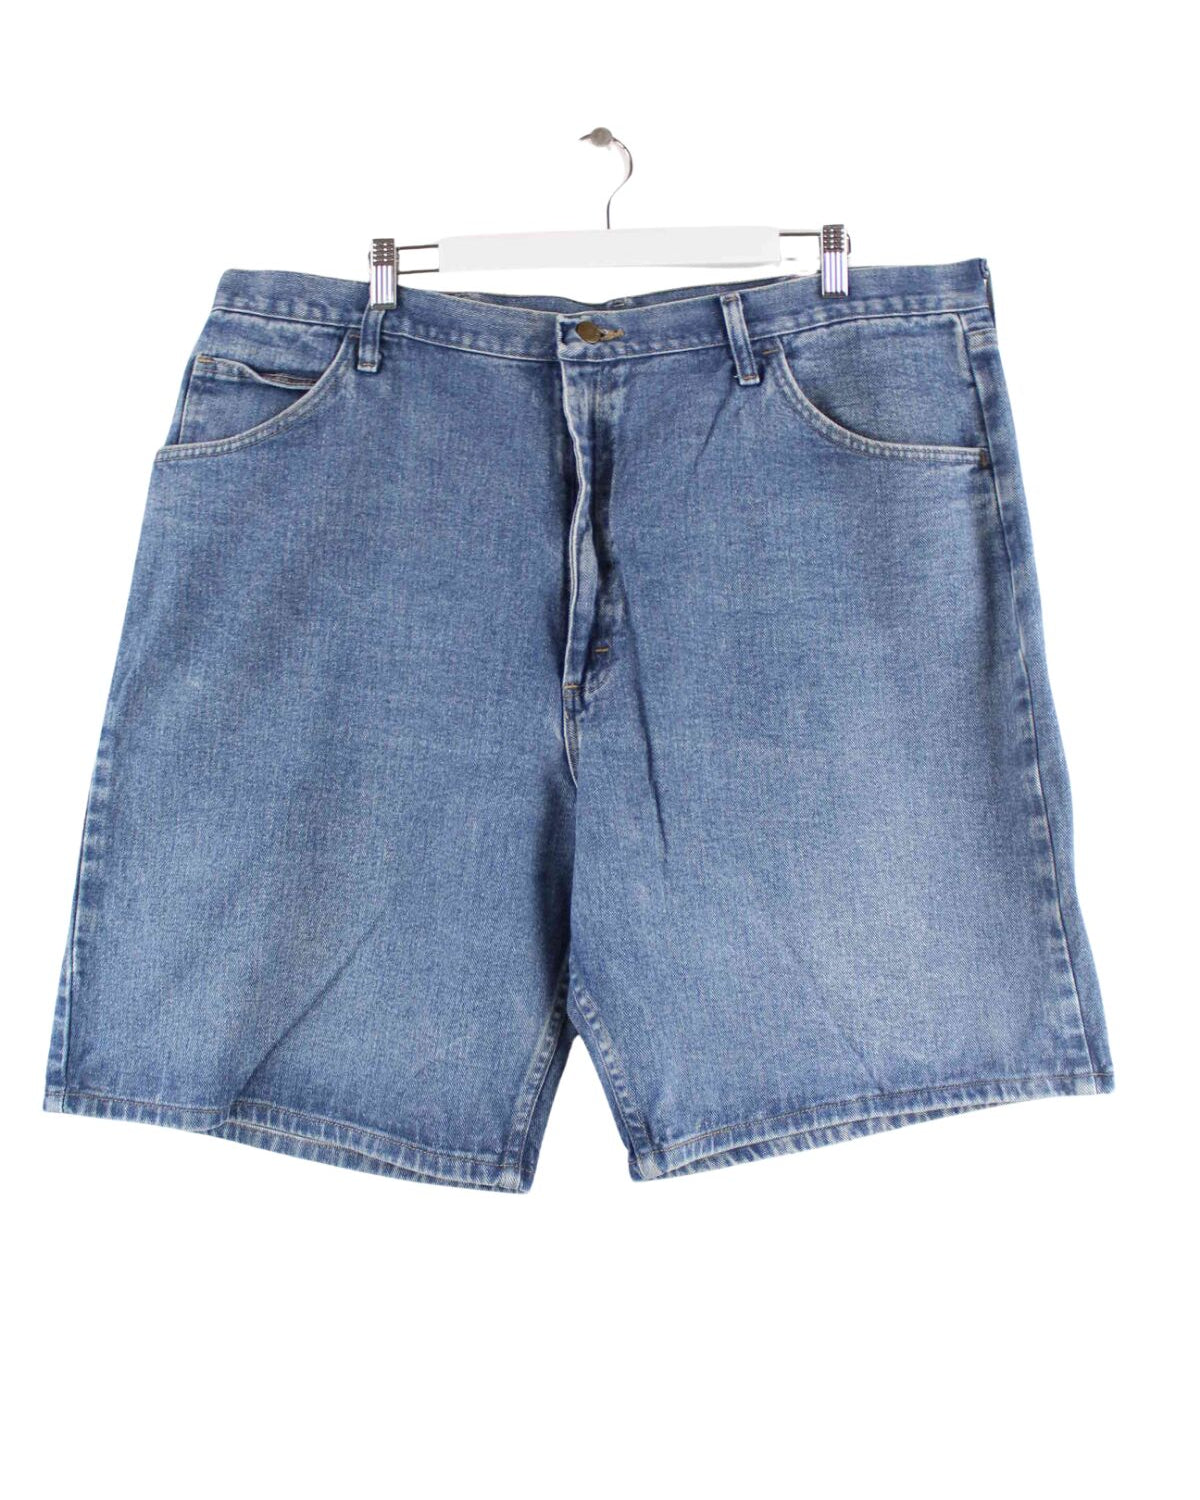 Wrangler Relaxed Fit Jeans Shorts Blau W42 (front image)